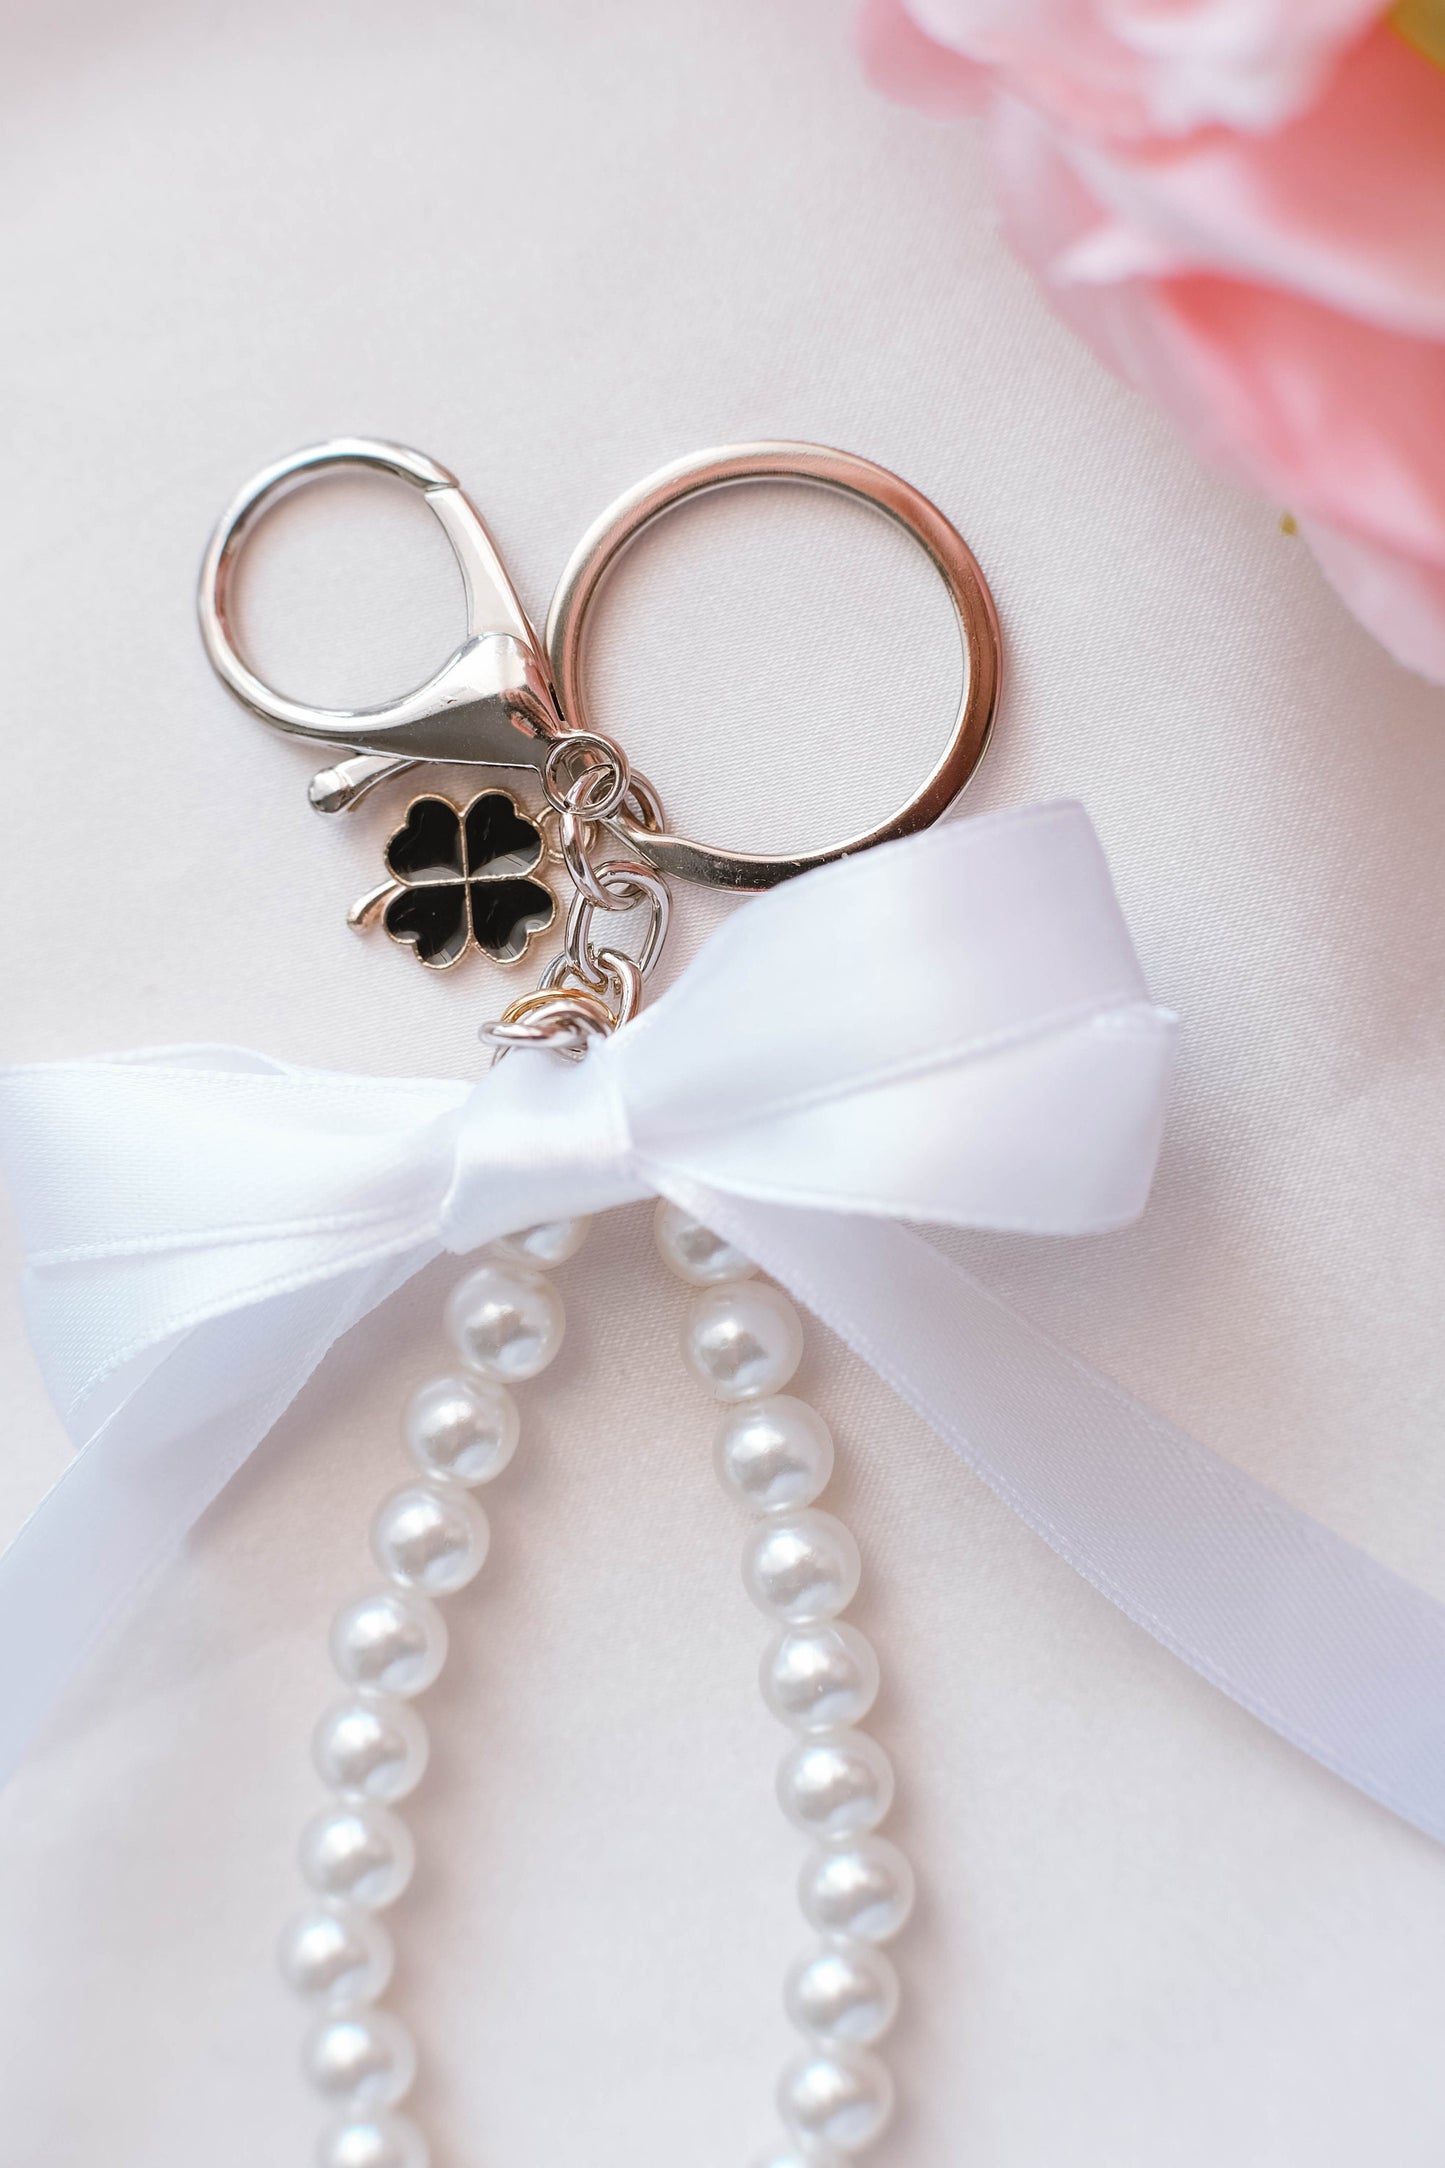 Pearl and Ribbon Keychain Elegant Wristlet For Women Purse Accessory For Her Gift Idea for BFF Aesthetic Keychain For Women Luxury Keychain